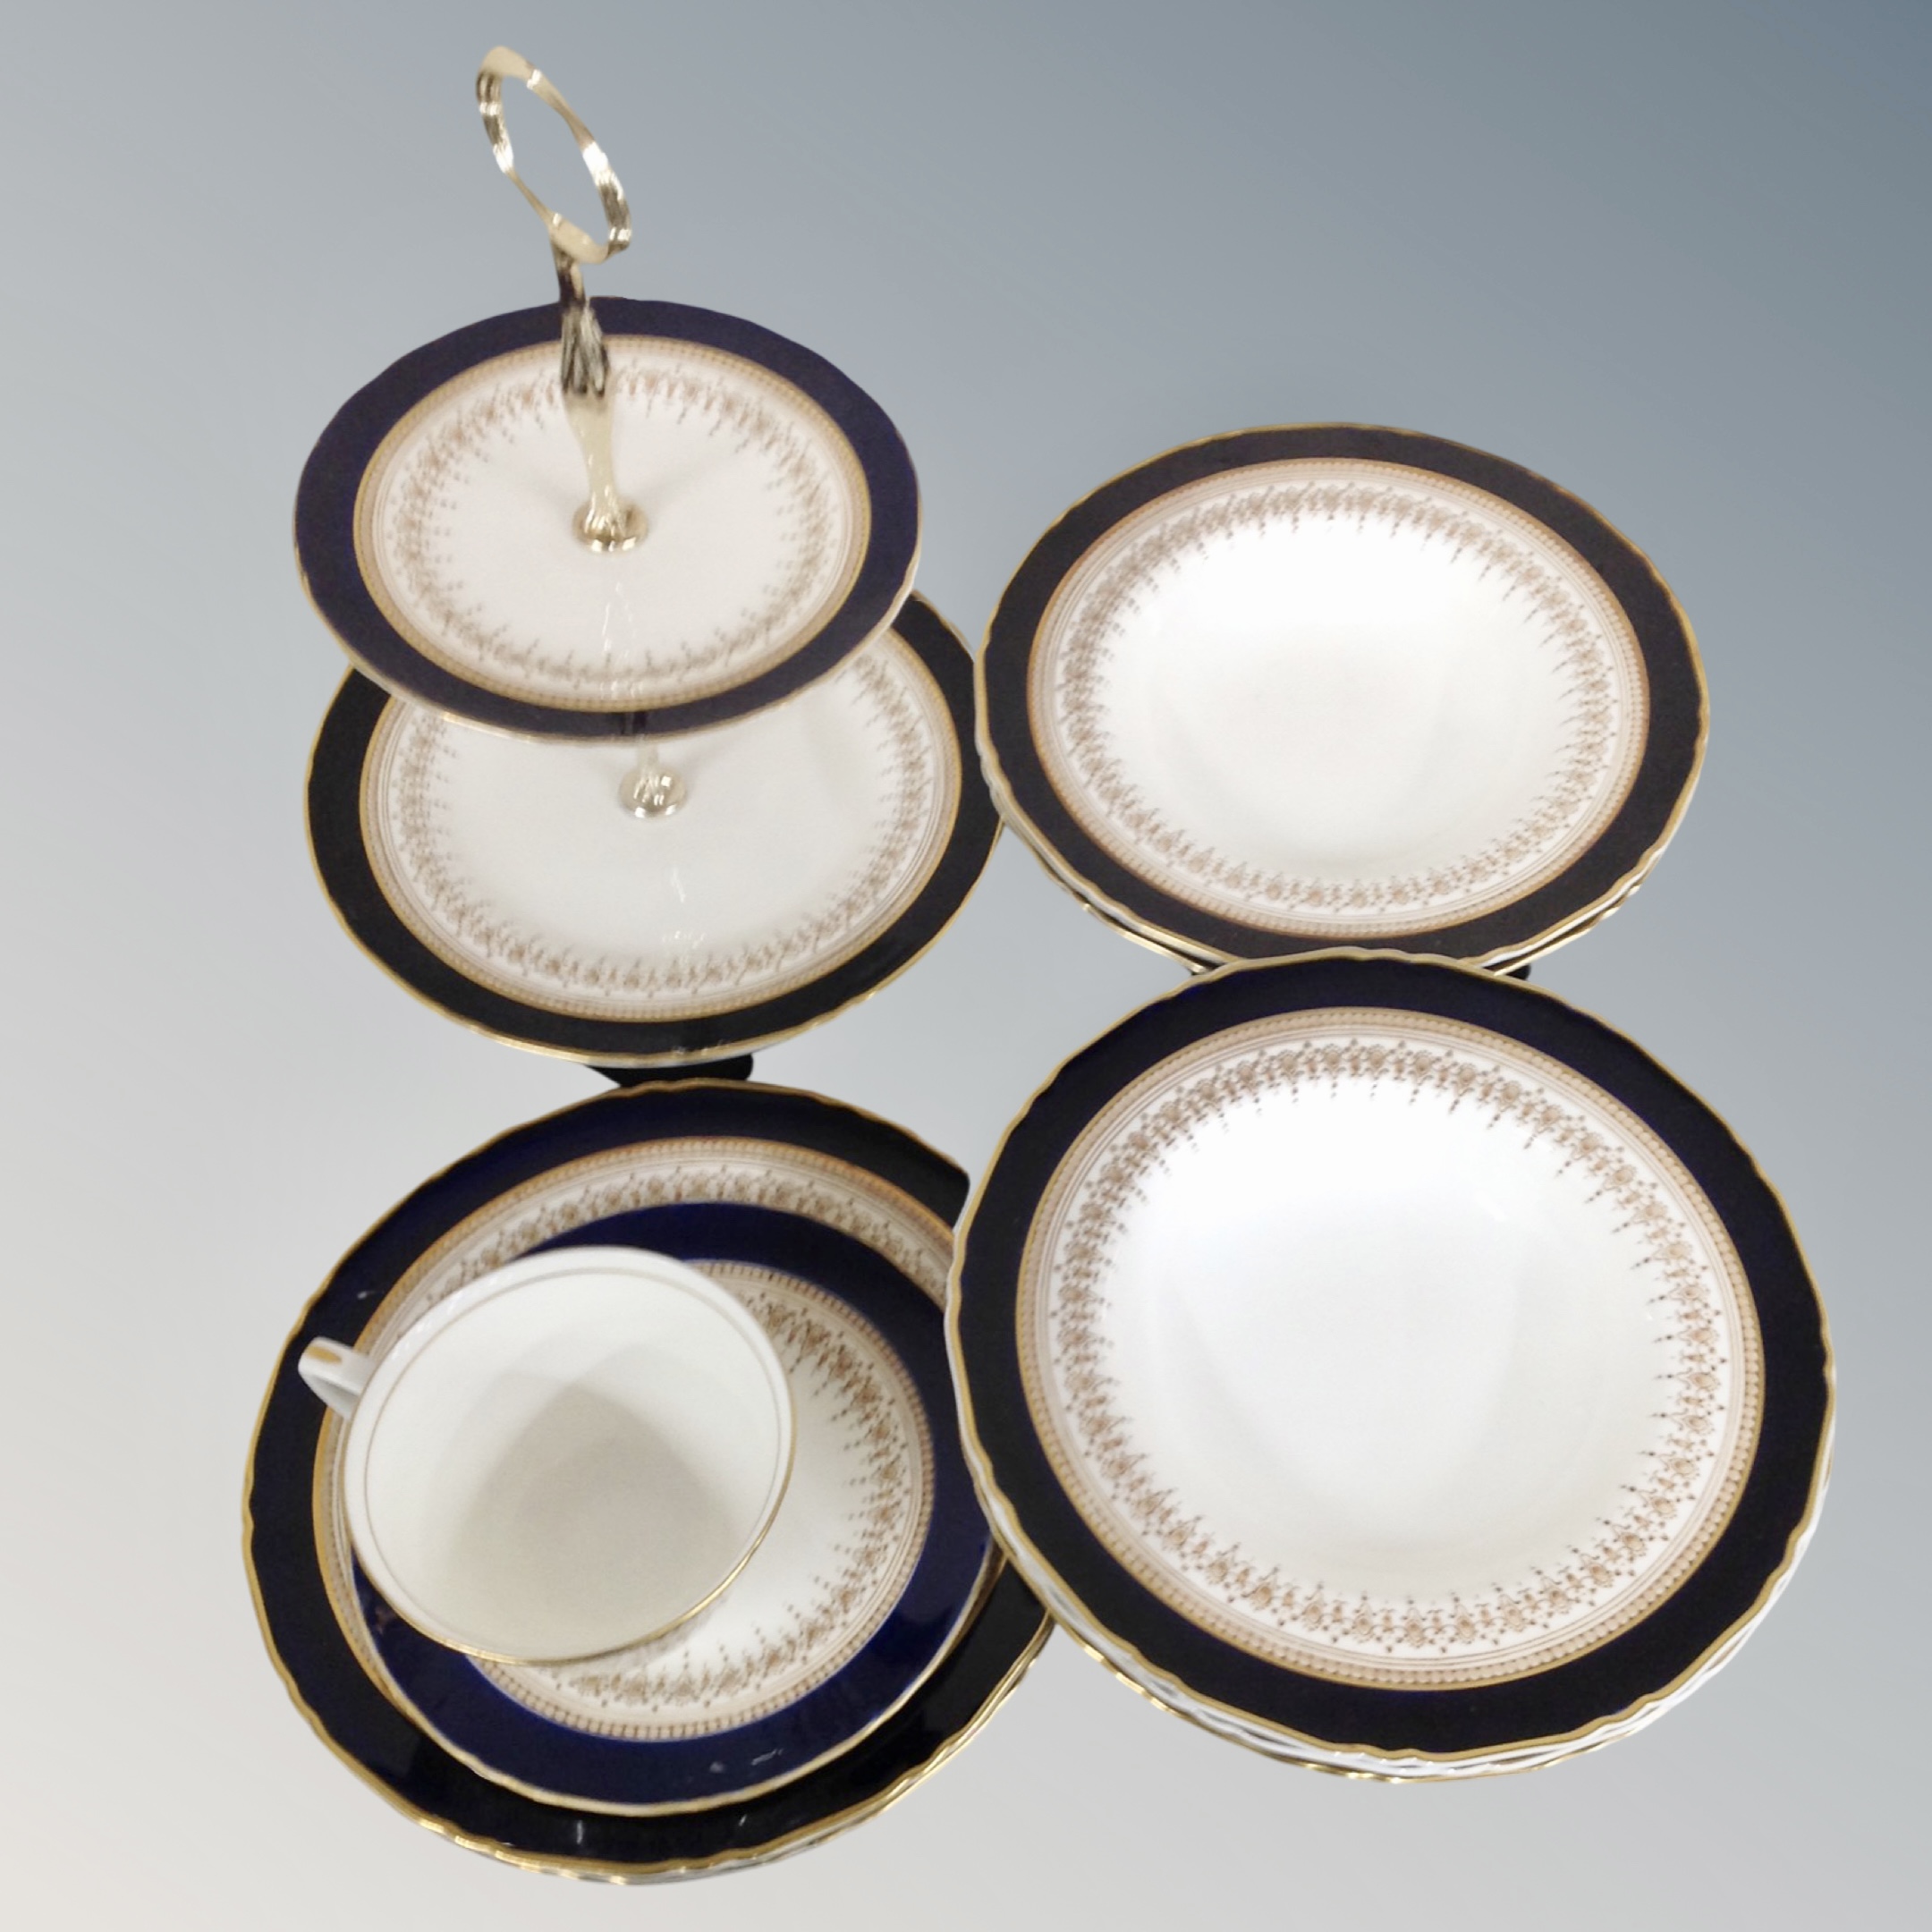 A tray of Royal Worcester Regency china including bowls, cake stand etc.